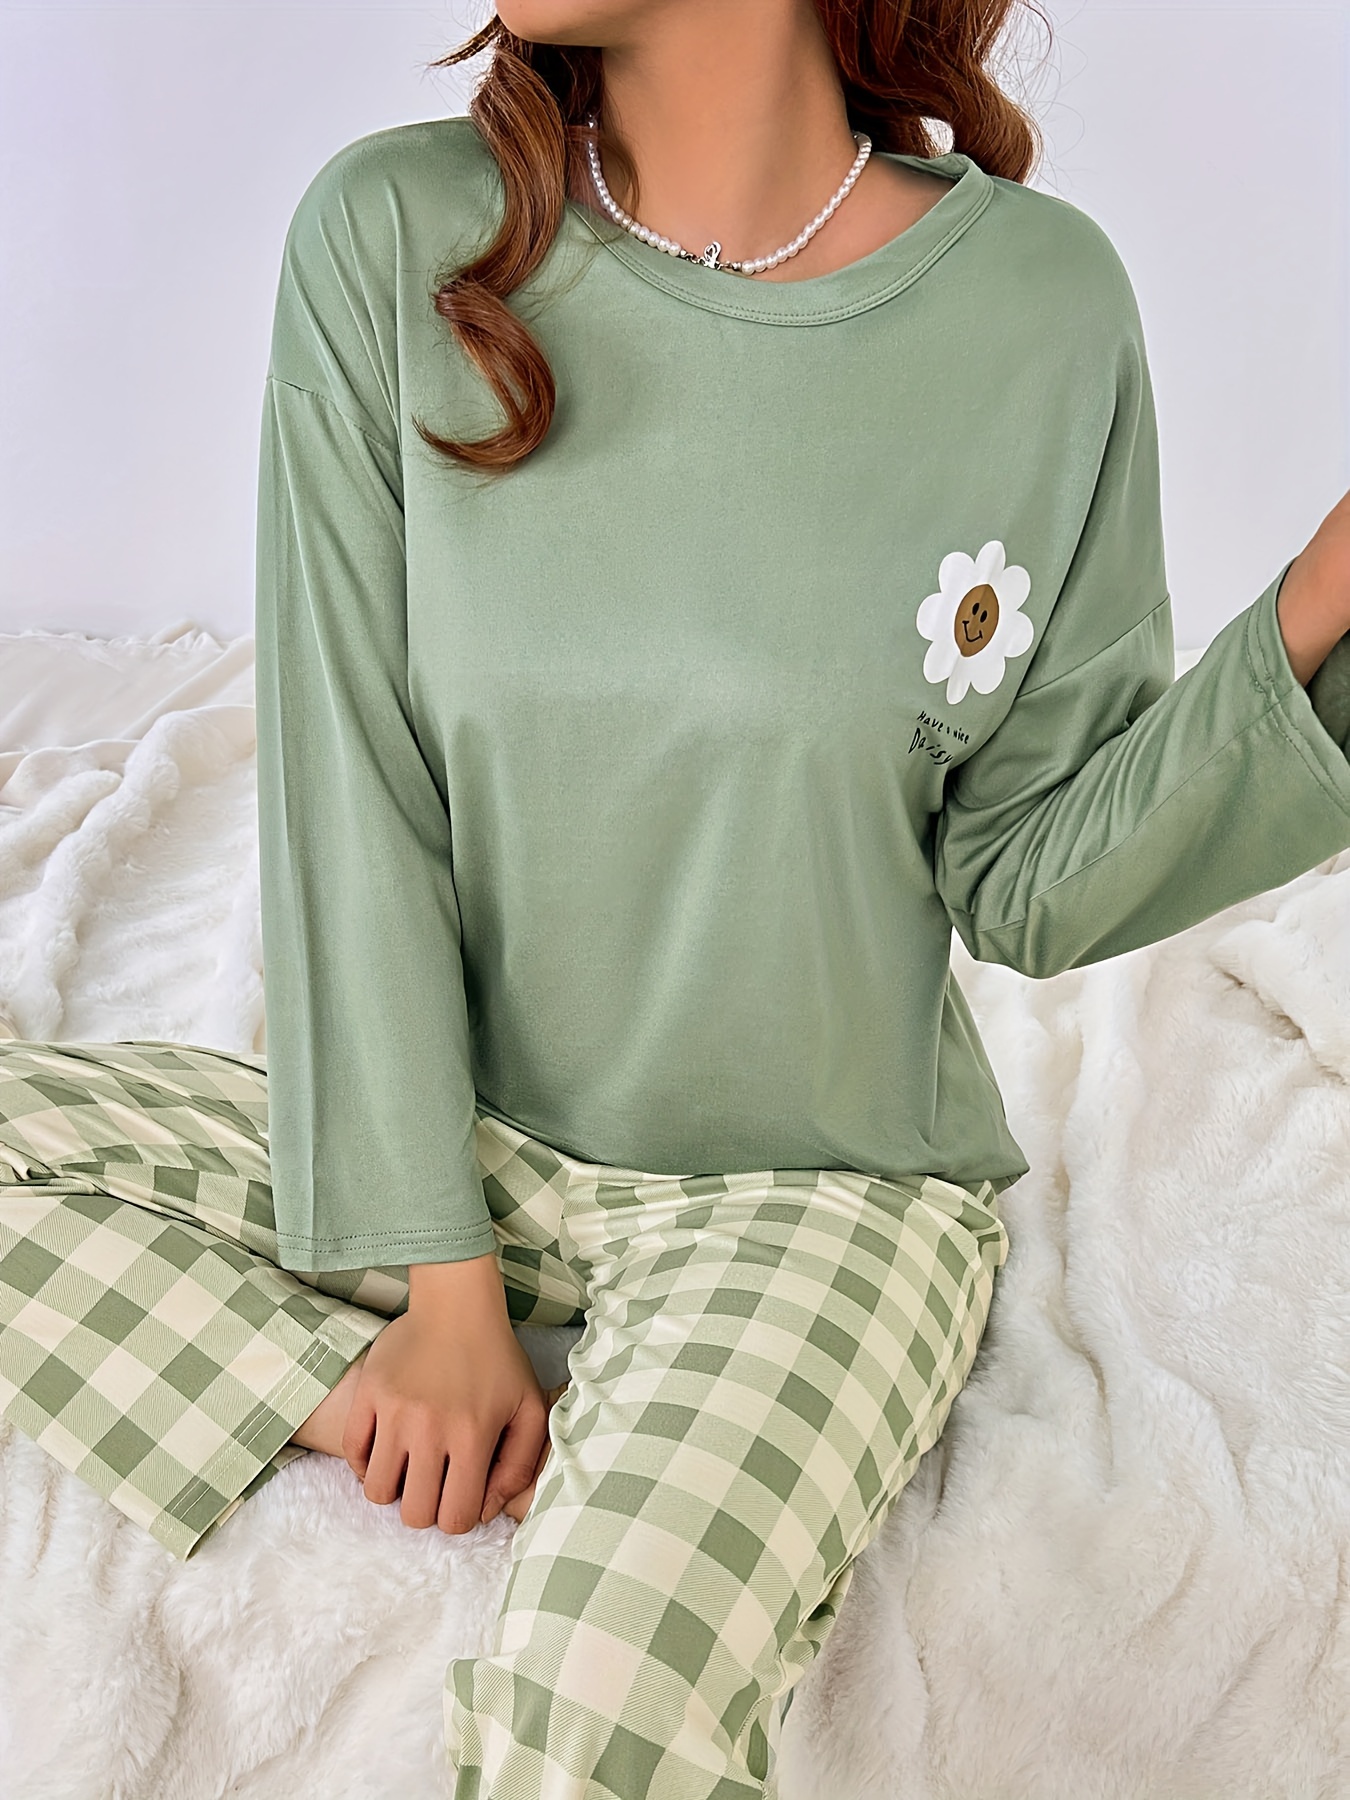 cute pajama sets, aesthetic pajamas, cozy, comfy sets, floral sets, gingham pattern